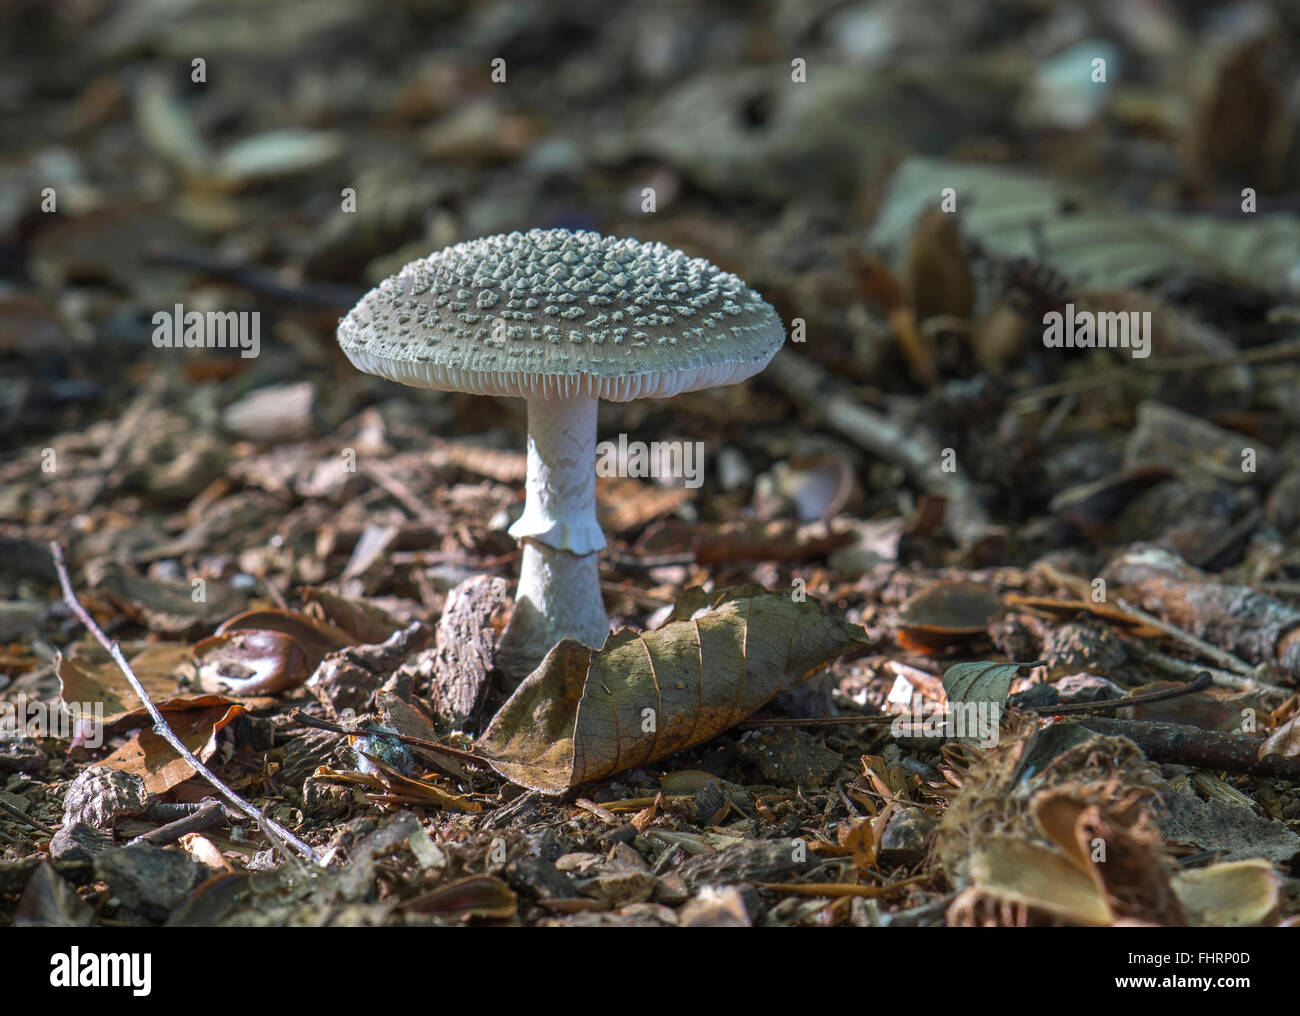 Panther cap (Amanita pantherina), very toxic, deadly, Mönchbruch forest, Rüsselsheim, Hesse, Germany Stock Photo